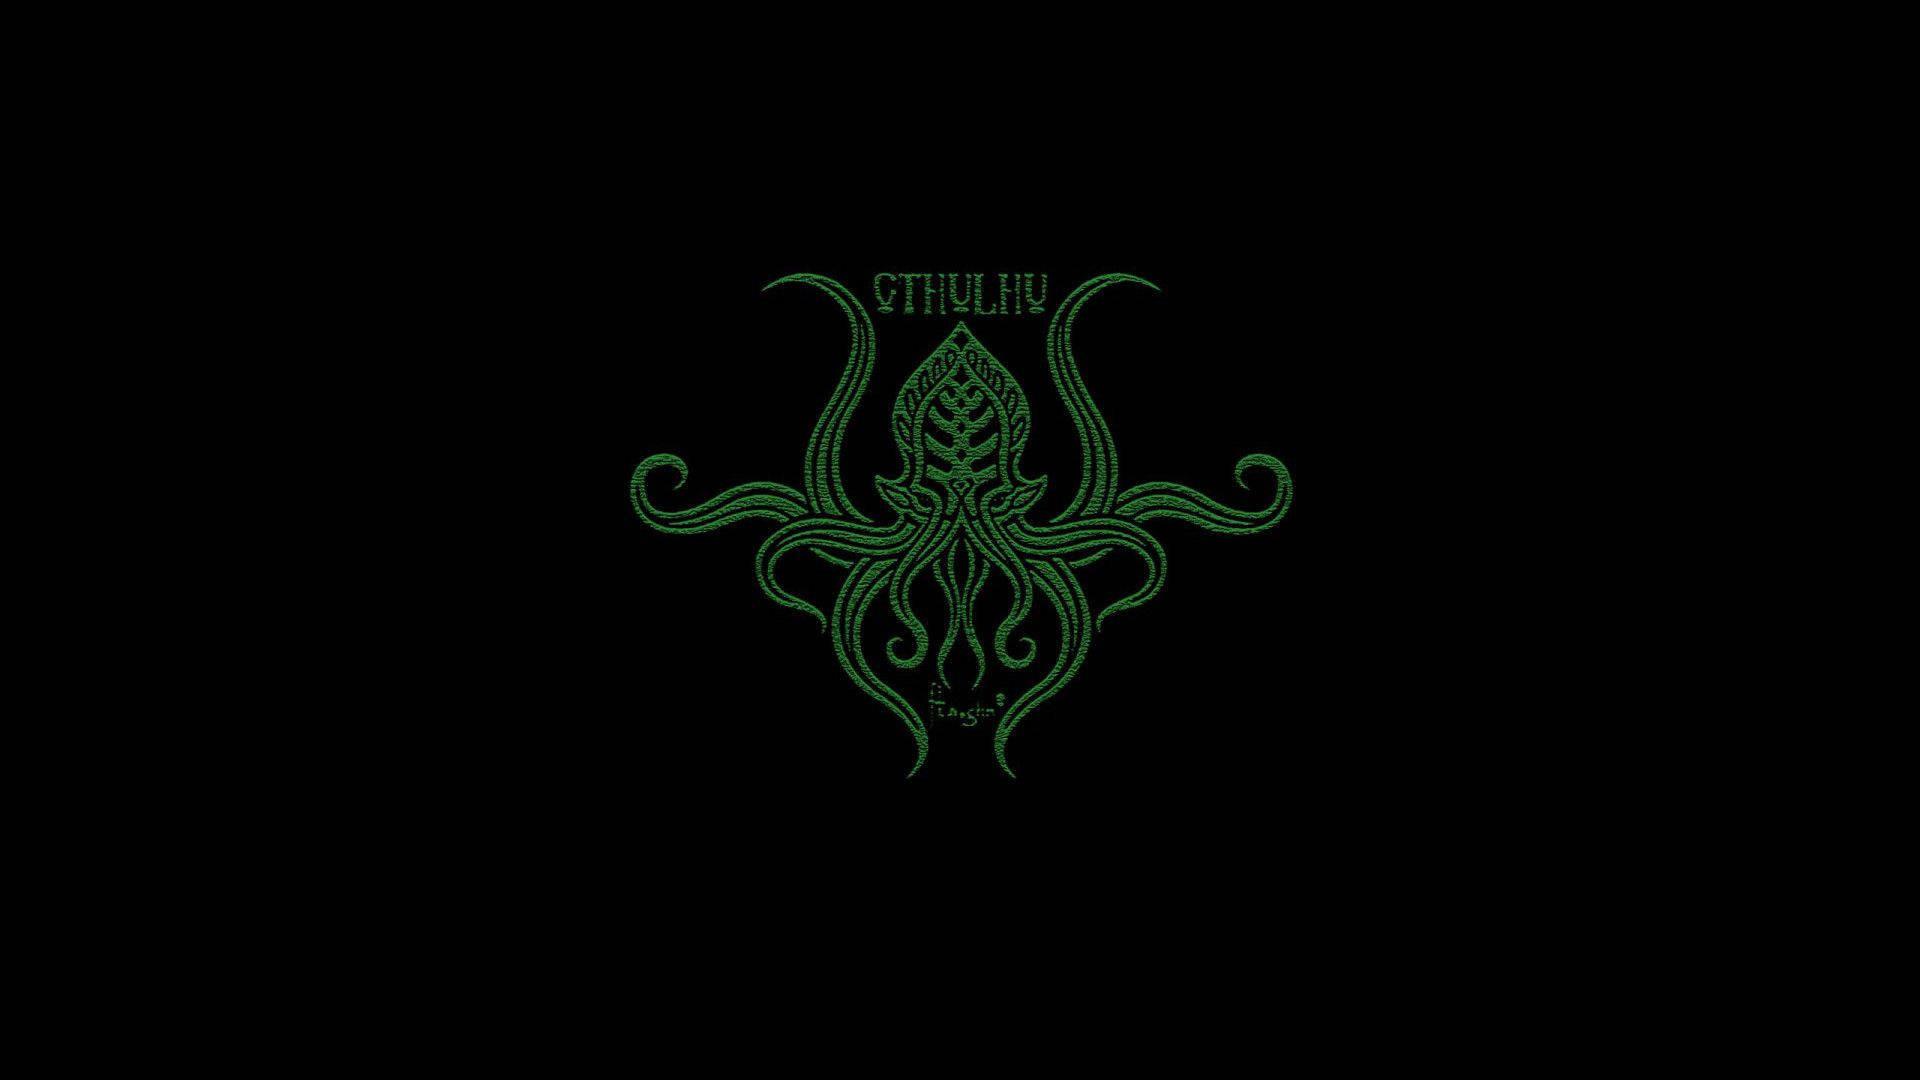 A Mythos-inspired green symbol of superstition and fear Wallpaper